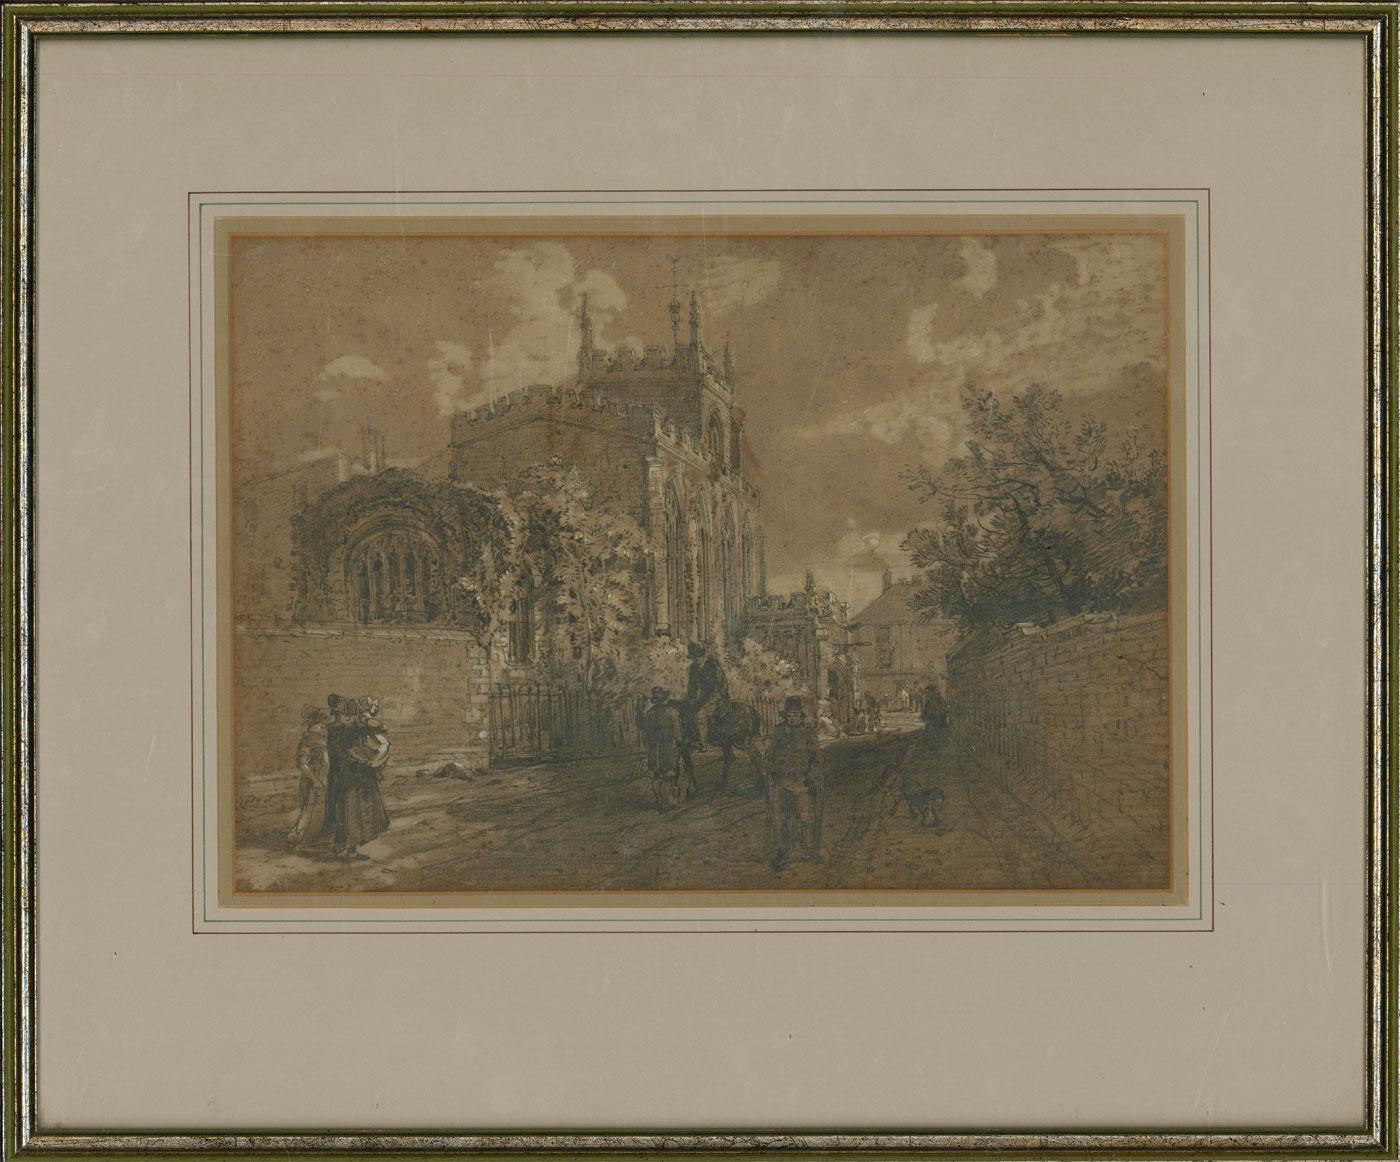 A well-detailed original mid 19th Century graphite drawing with touches of body color, depicting a town or village street scene beside a church. The architectural forms in the composition contrast and add scale to the figures, with a horse rider and